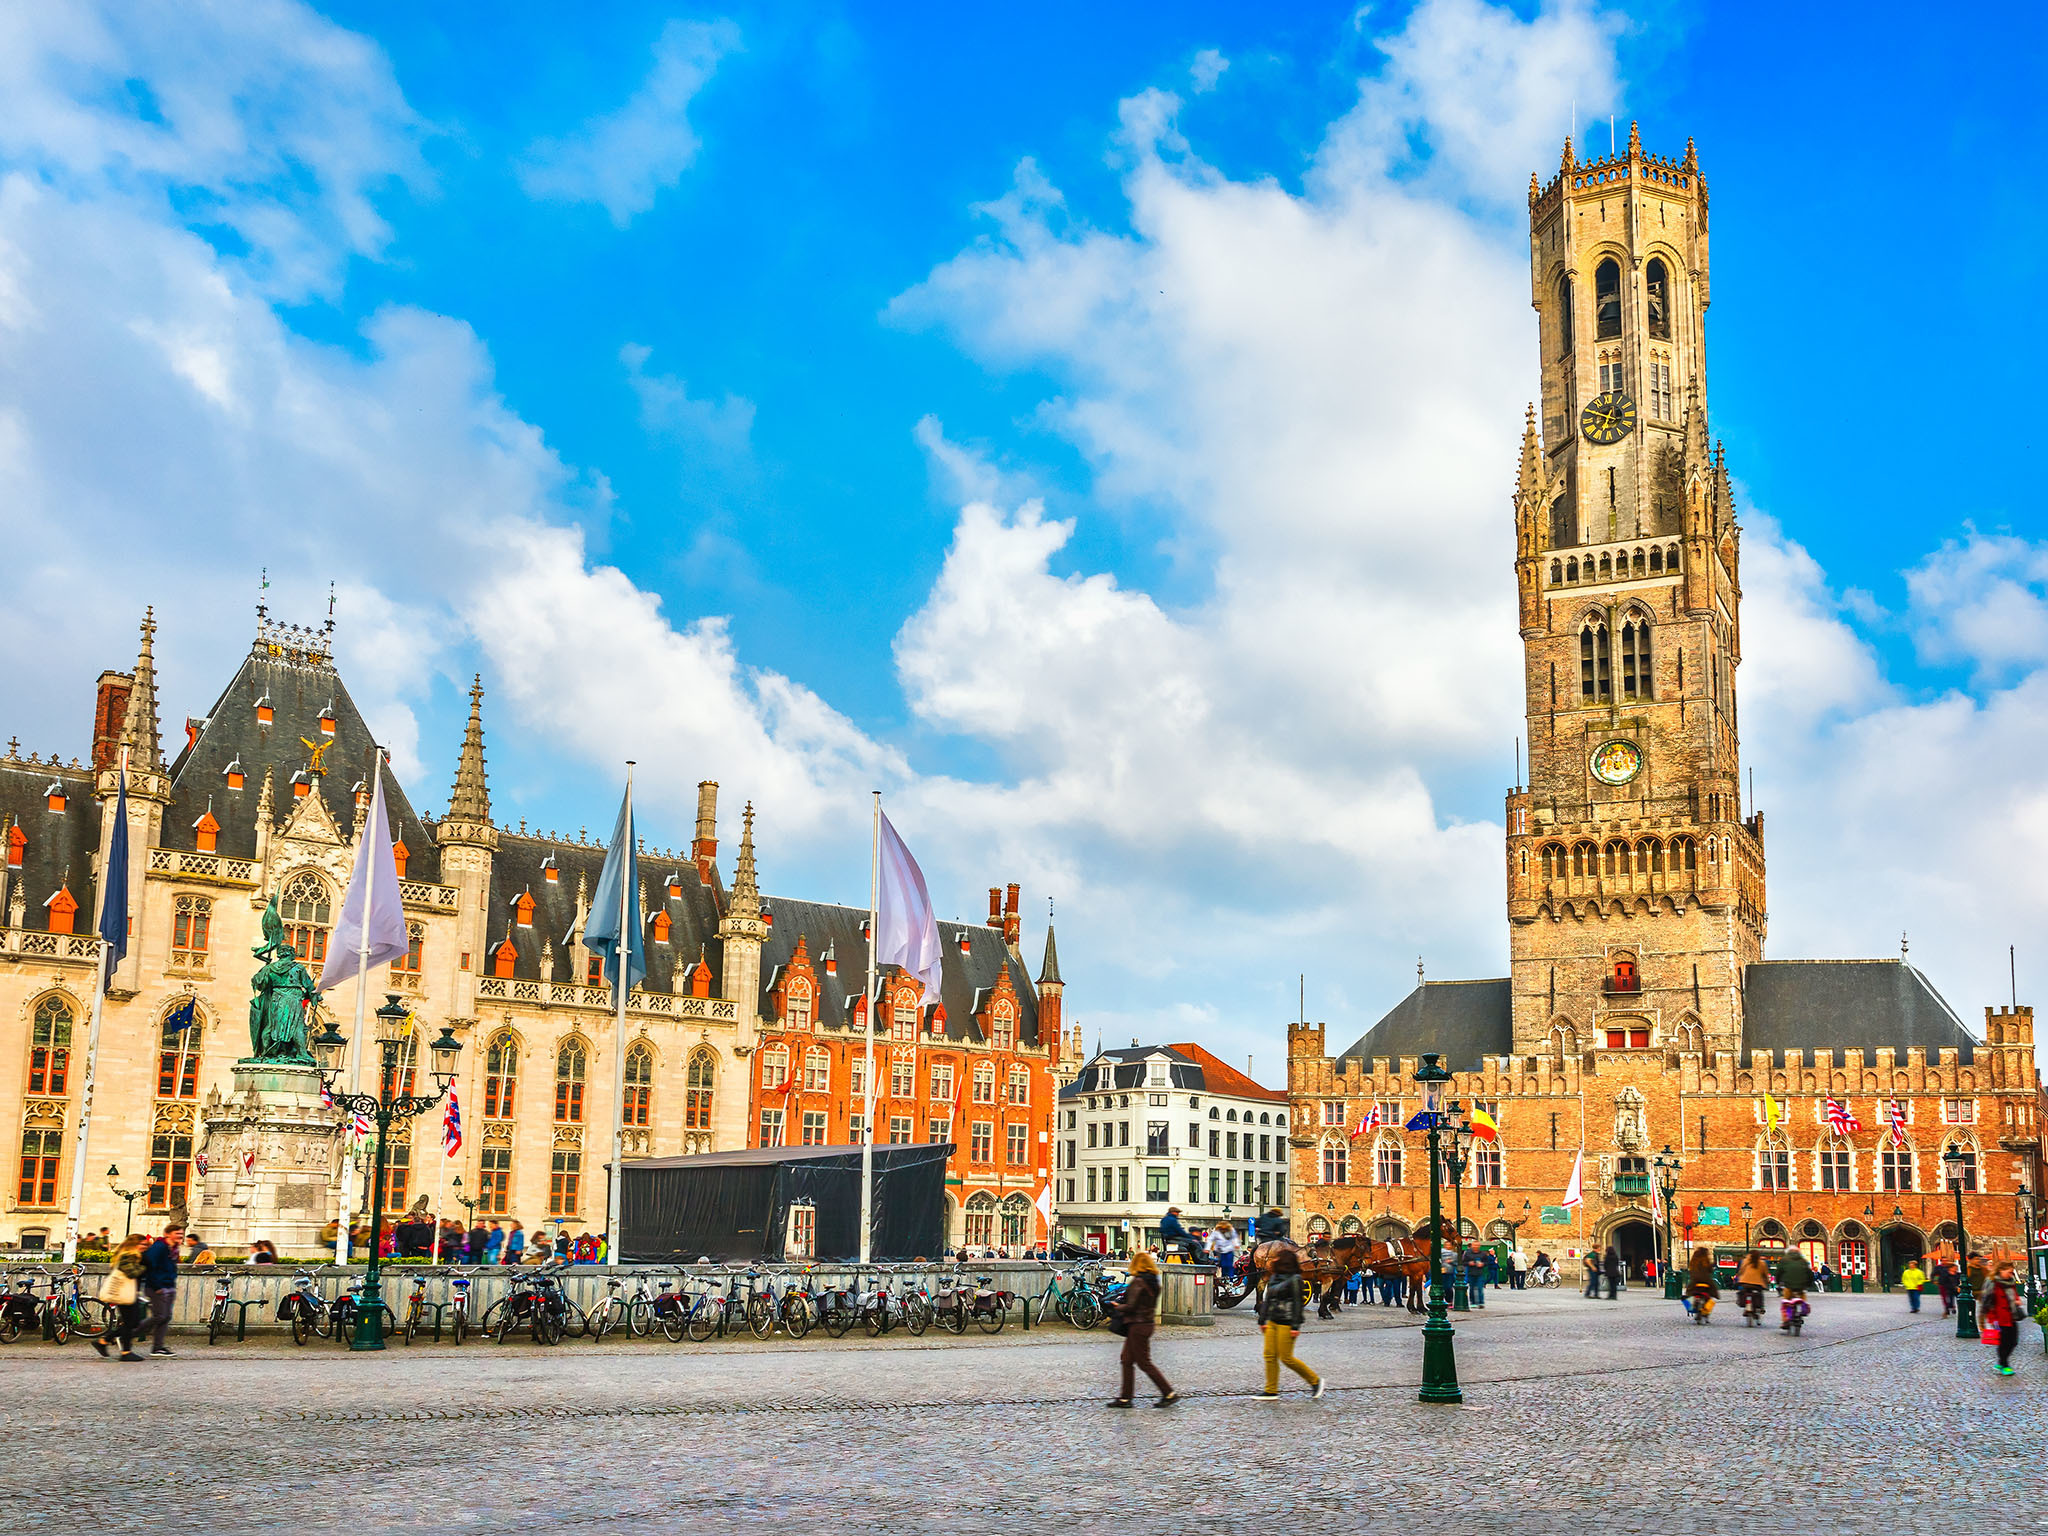 Bruges 2019 | The Ultimate Guide To Where To Go, Eat & Sleep in Bruges | Time Out2048 x 1536